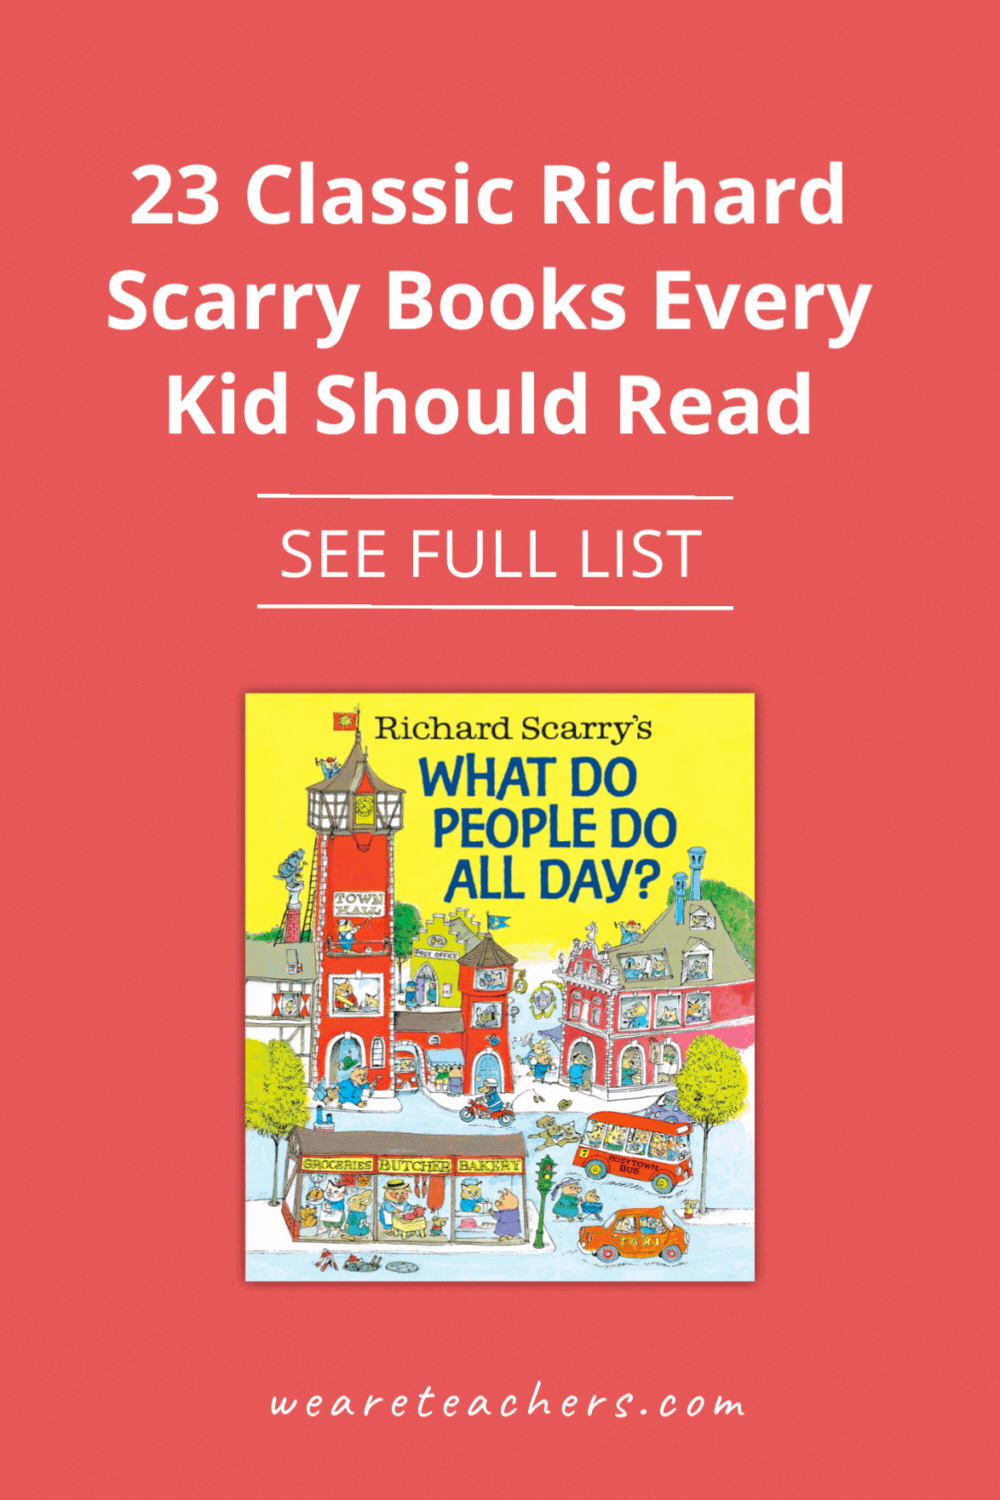 Help keep Richard Scarry relevant and bring his words into the next generation by checking out these 23 awesome Richard Scarry books!